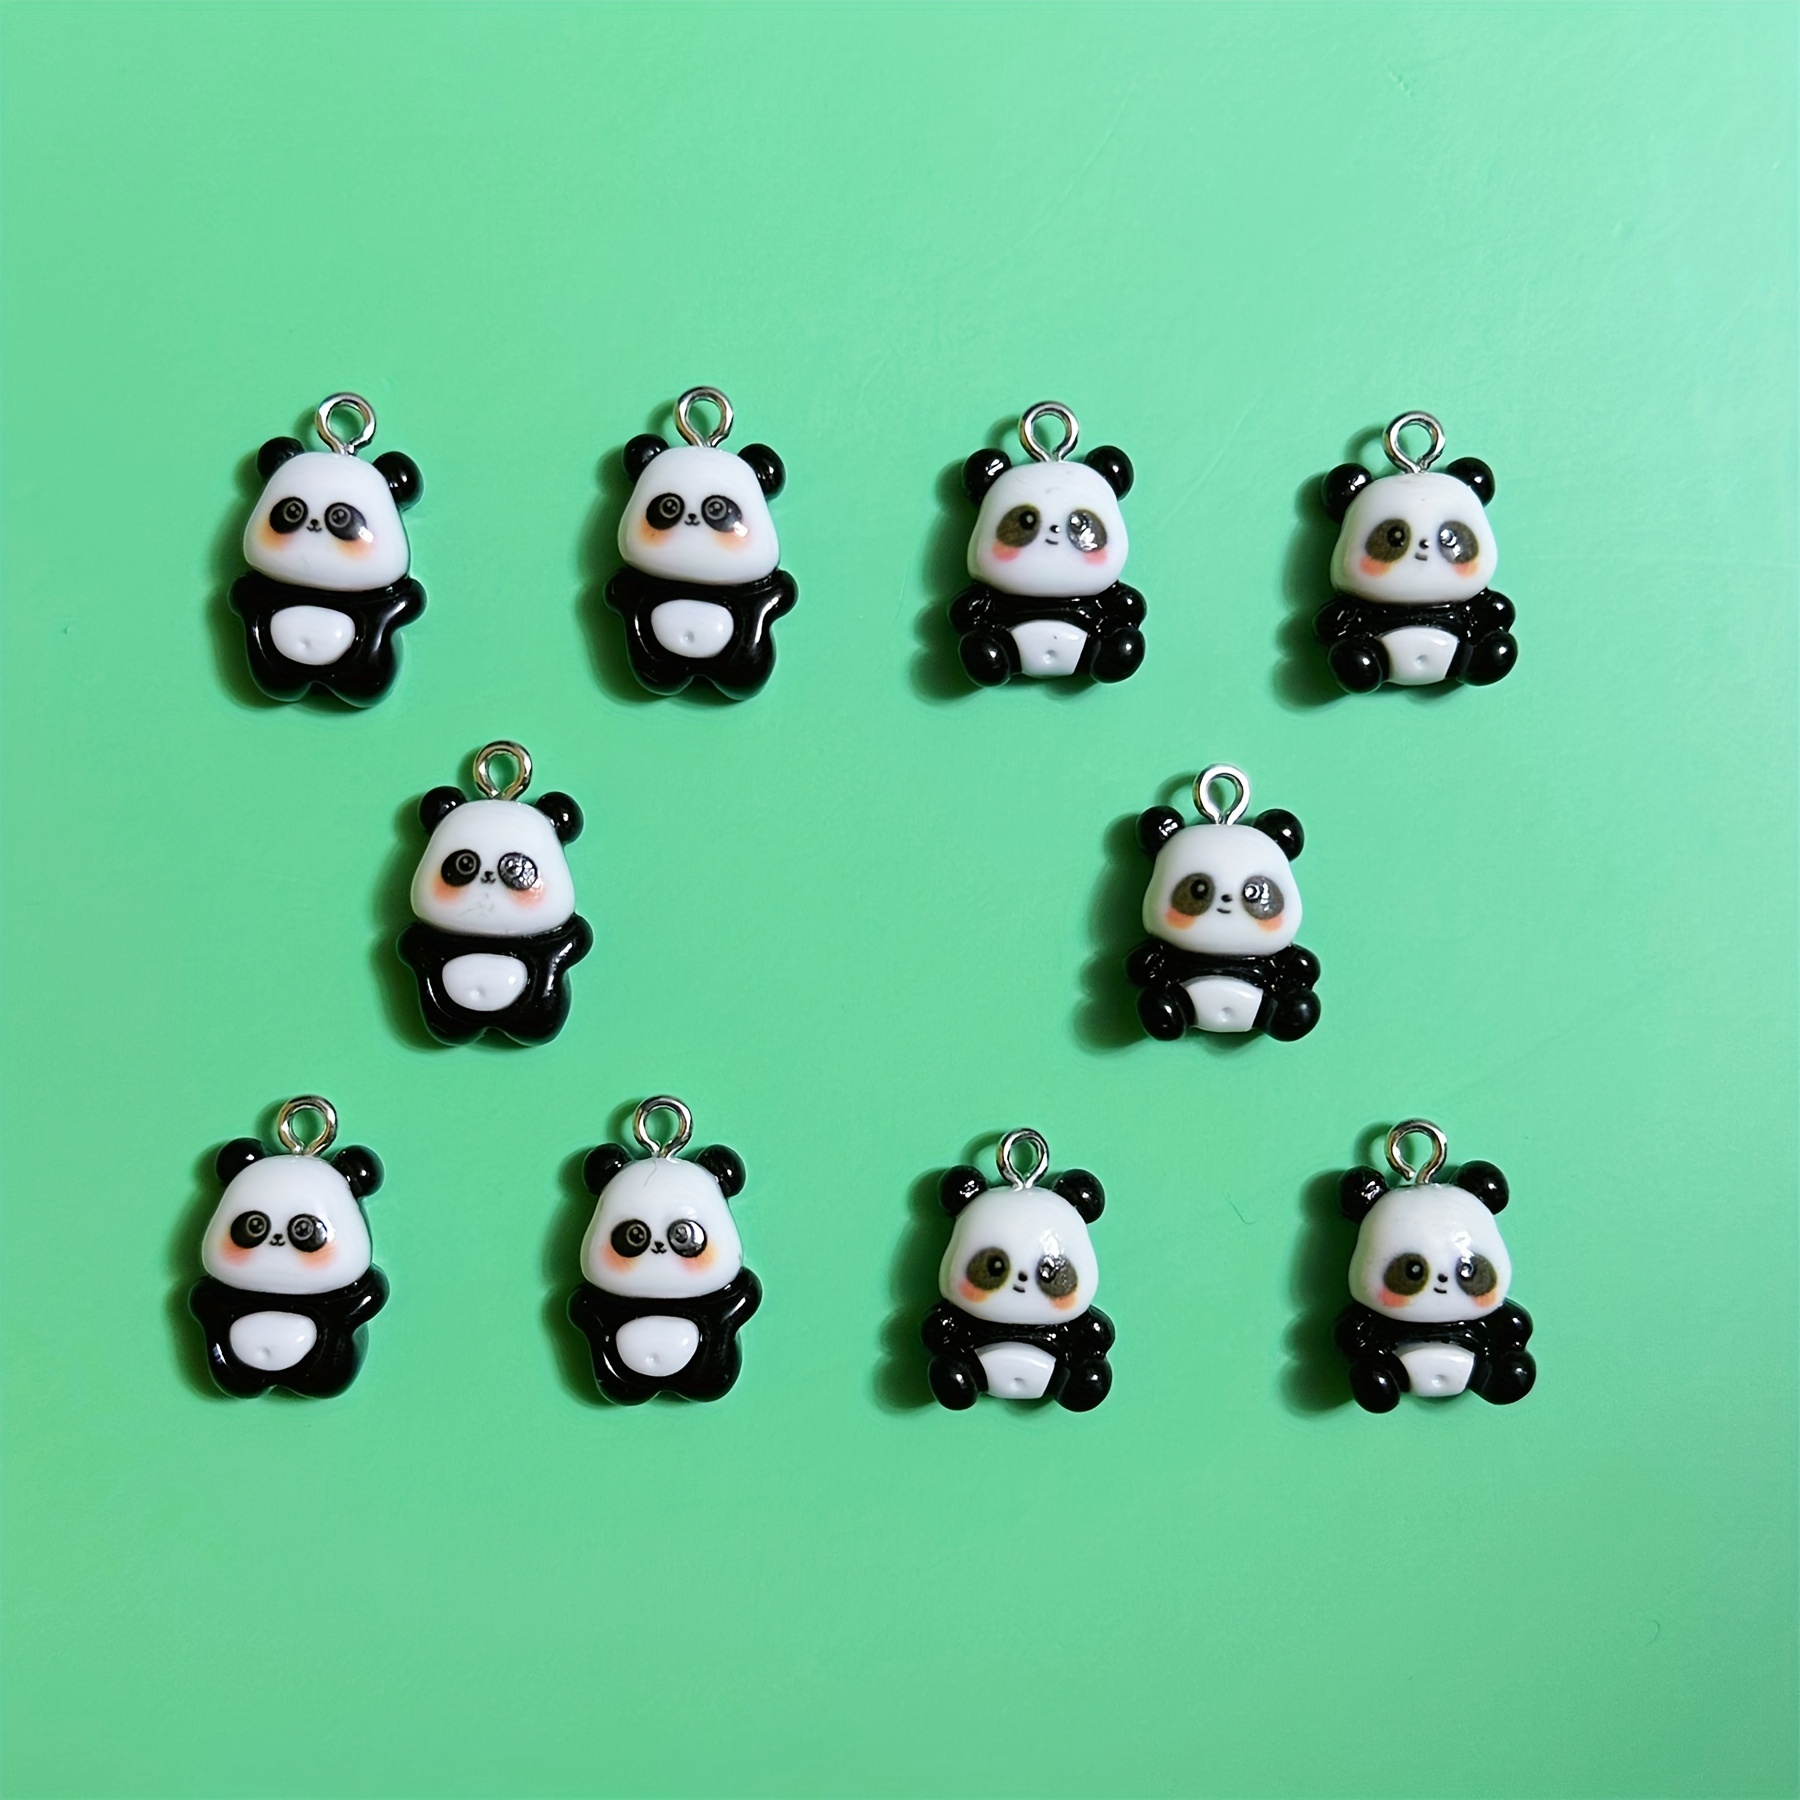 

10pcs/pack Handmade Cute Cartoon Panda Charms, Assorted Resin Pendants For Diy Jewelry, Earrings, Necklaces, Bracelets, Keychains, Creative Gifts & Accessories